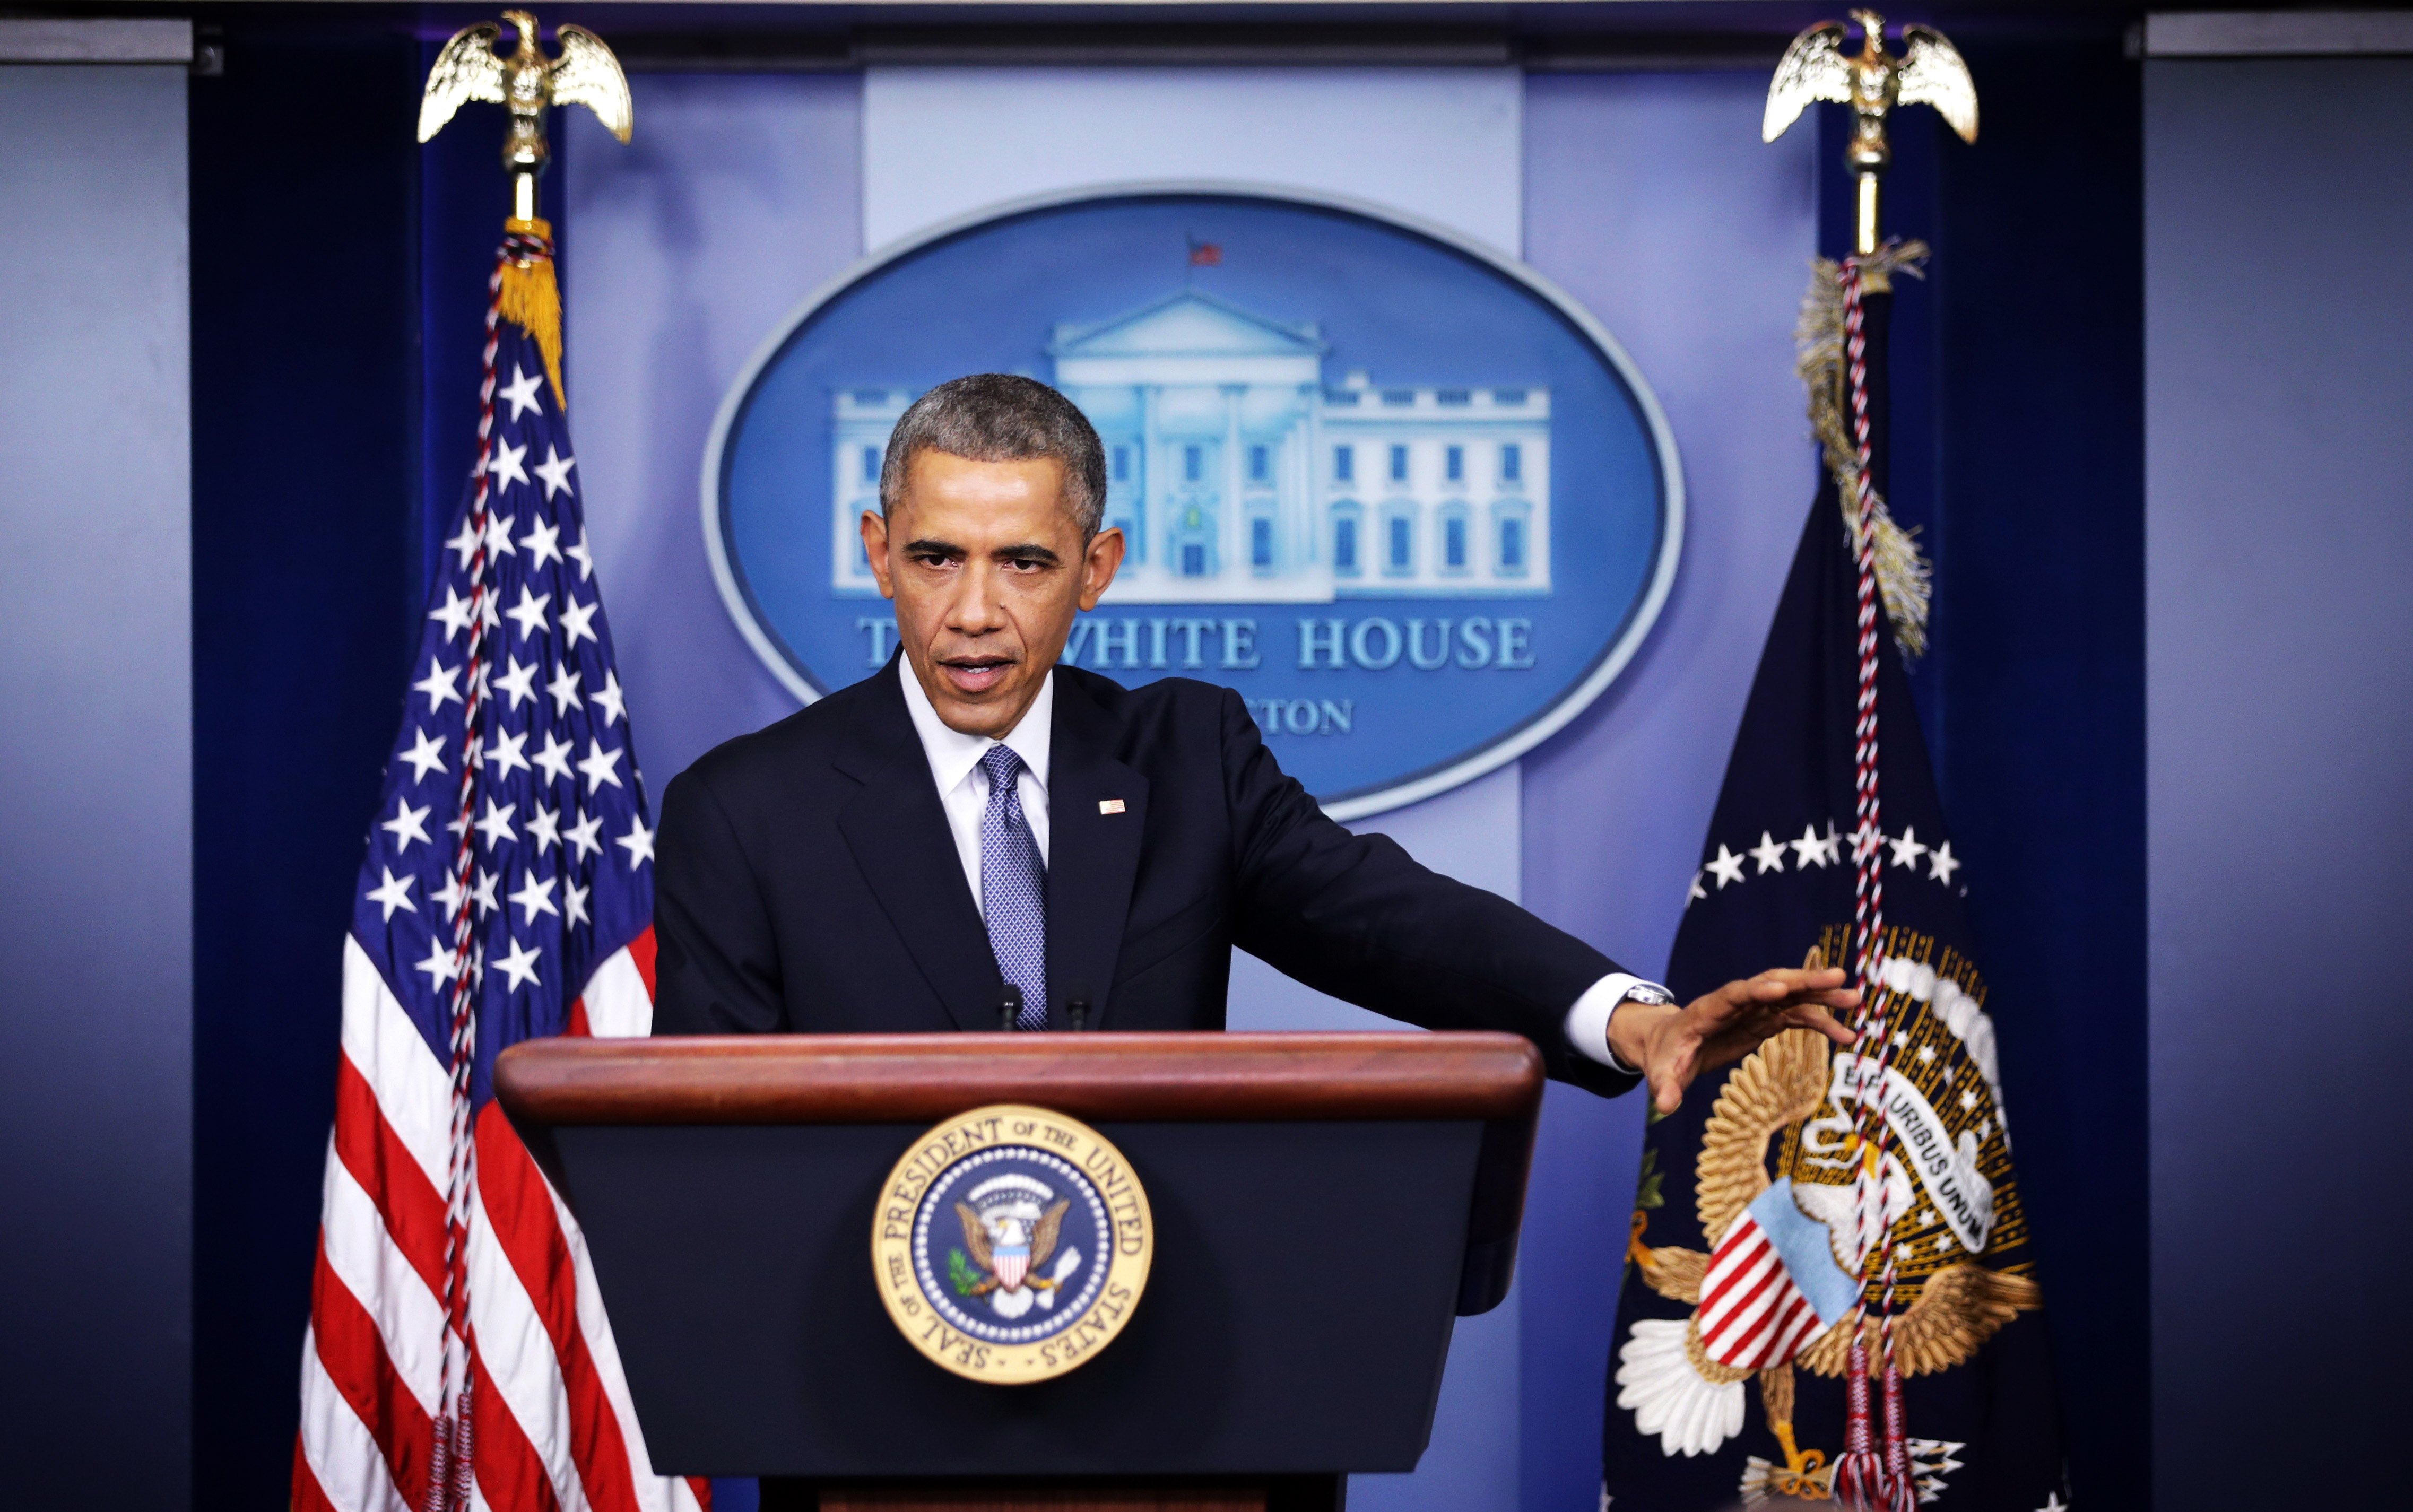 WASHINGTON, DC - DECEMBER 19:  U.S. President Barack Obama speaks during his speech to members of the media during his last news conference of the year in the James Brady Press Briefing Room of the White House December 19, 2014 in Washington, DC. President Obama faced questions on various topics including the changing of Cuba policy, his executive action on immigration and the Sony hack.  (Photo by Alex Wong/Getty Images) (Alex Wong—Getty Images)